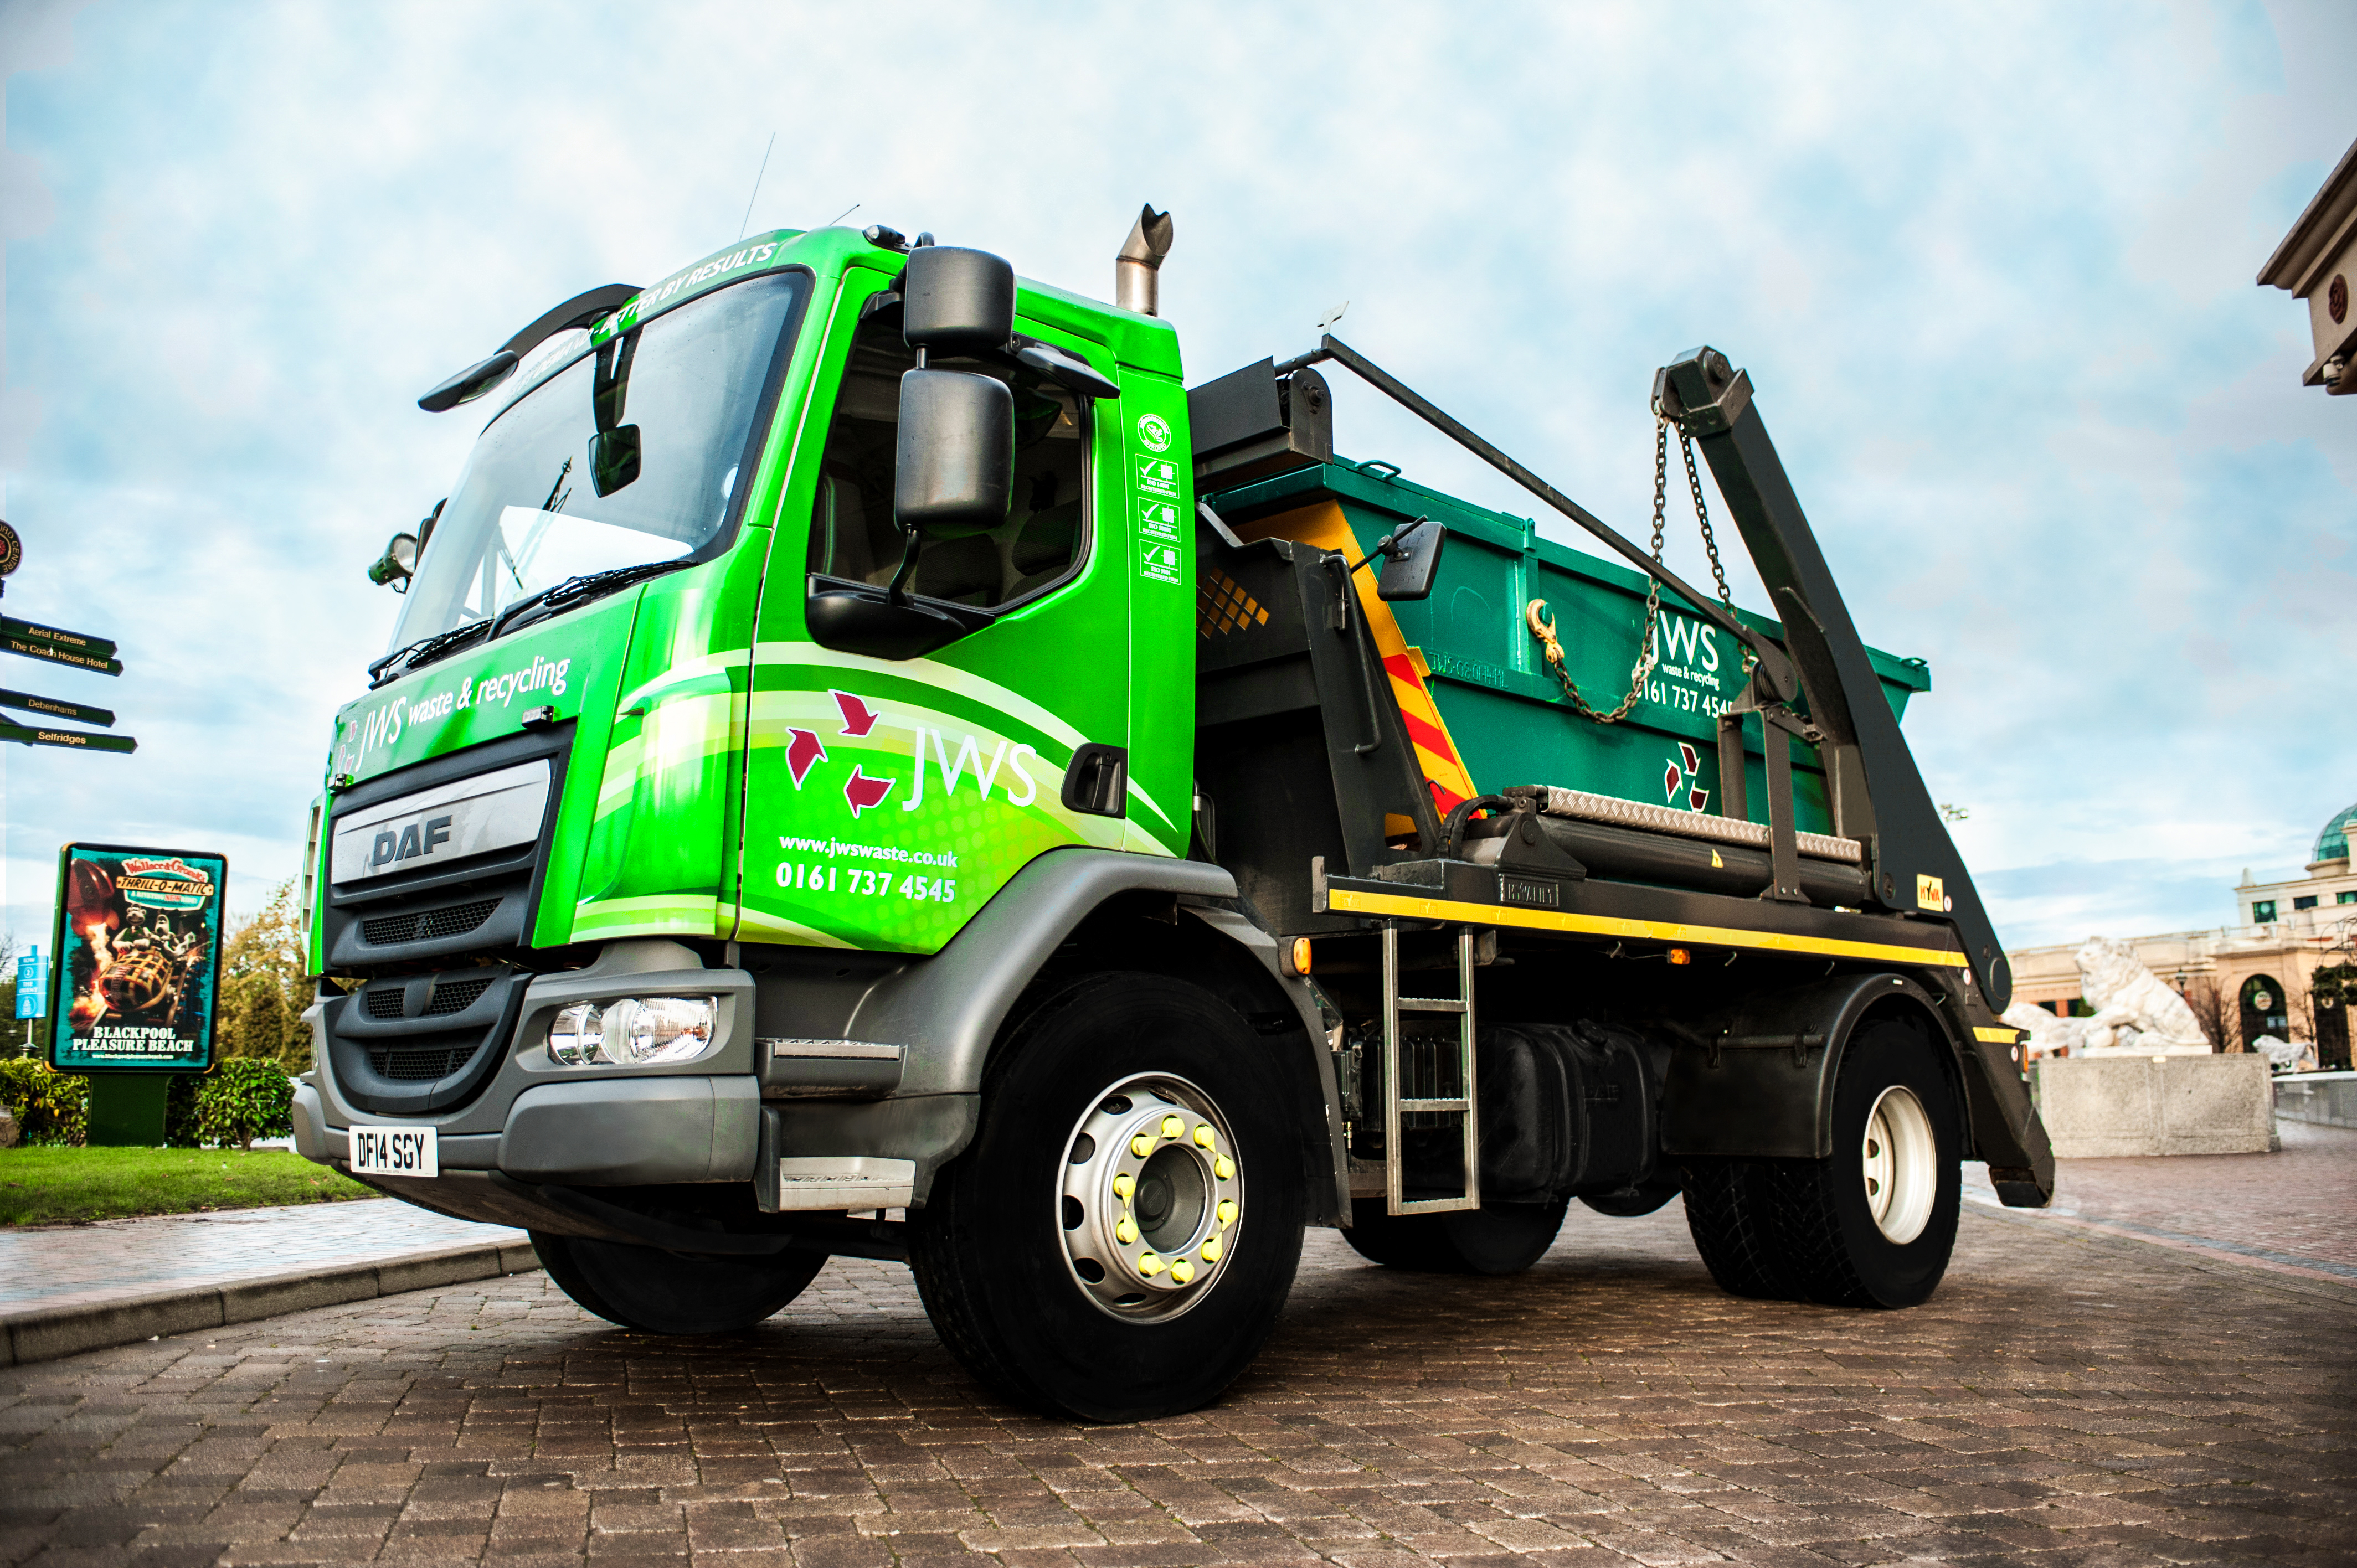 New, bright green JWS Waste vehicles are brimming with recycling passion with iconic arrowed symbol that is the JWS logo.